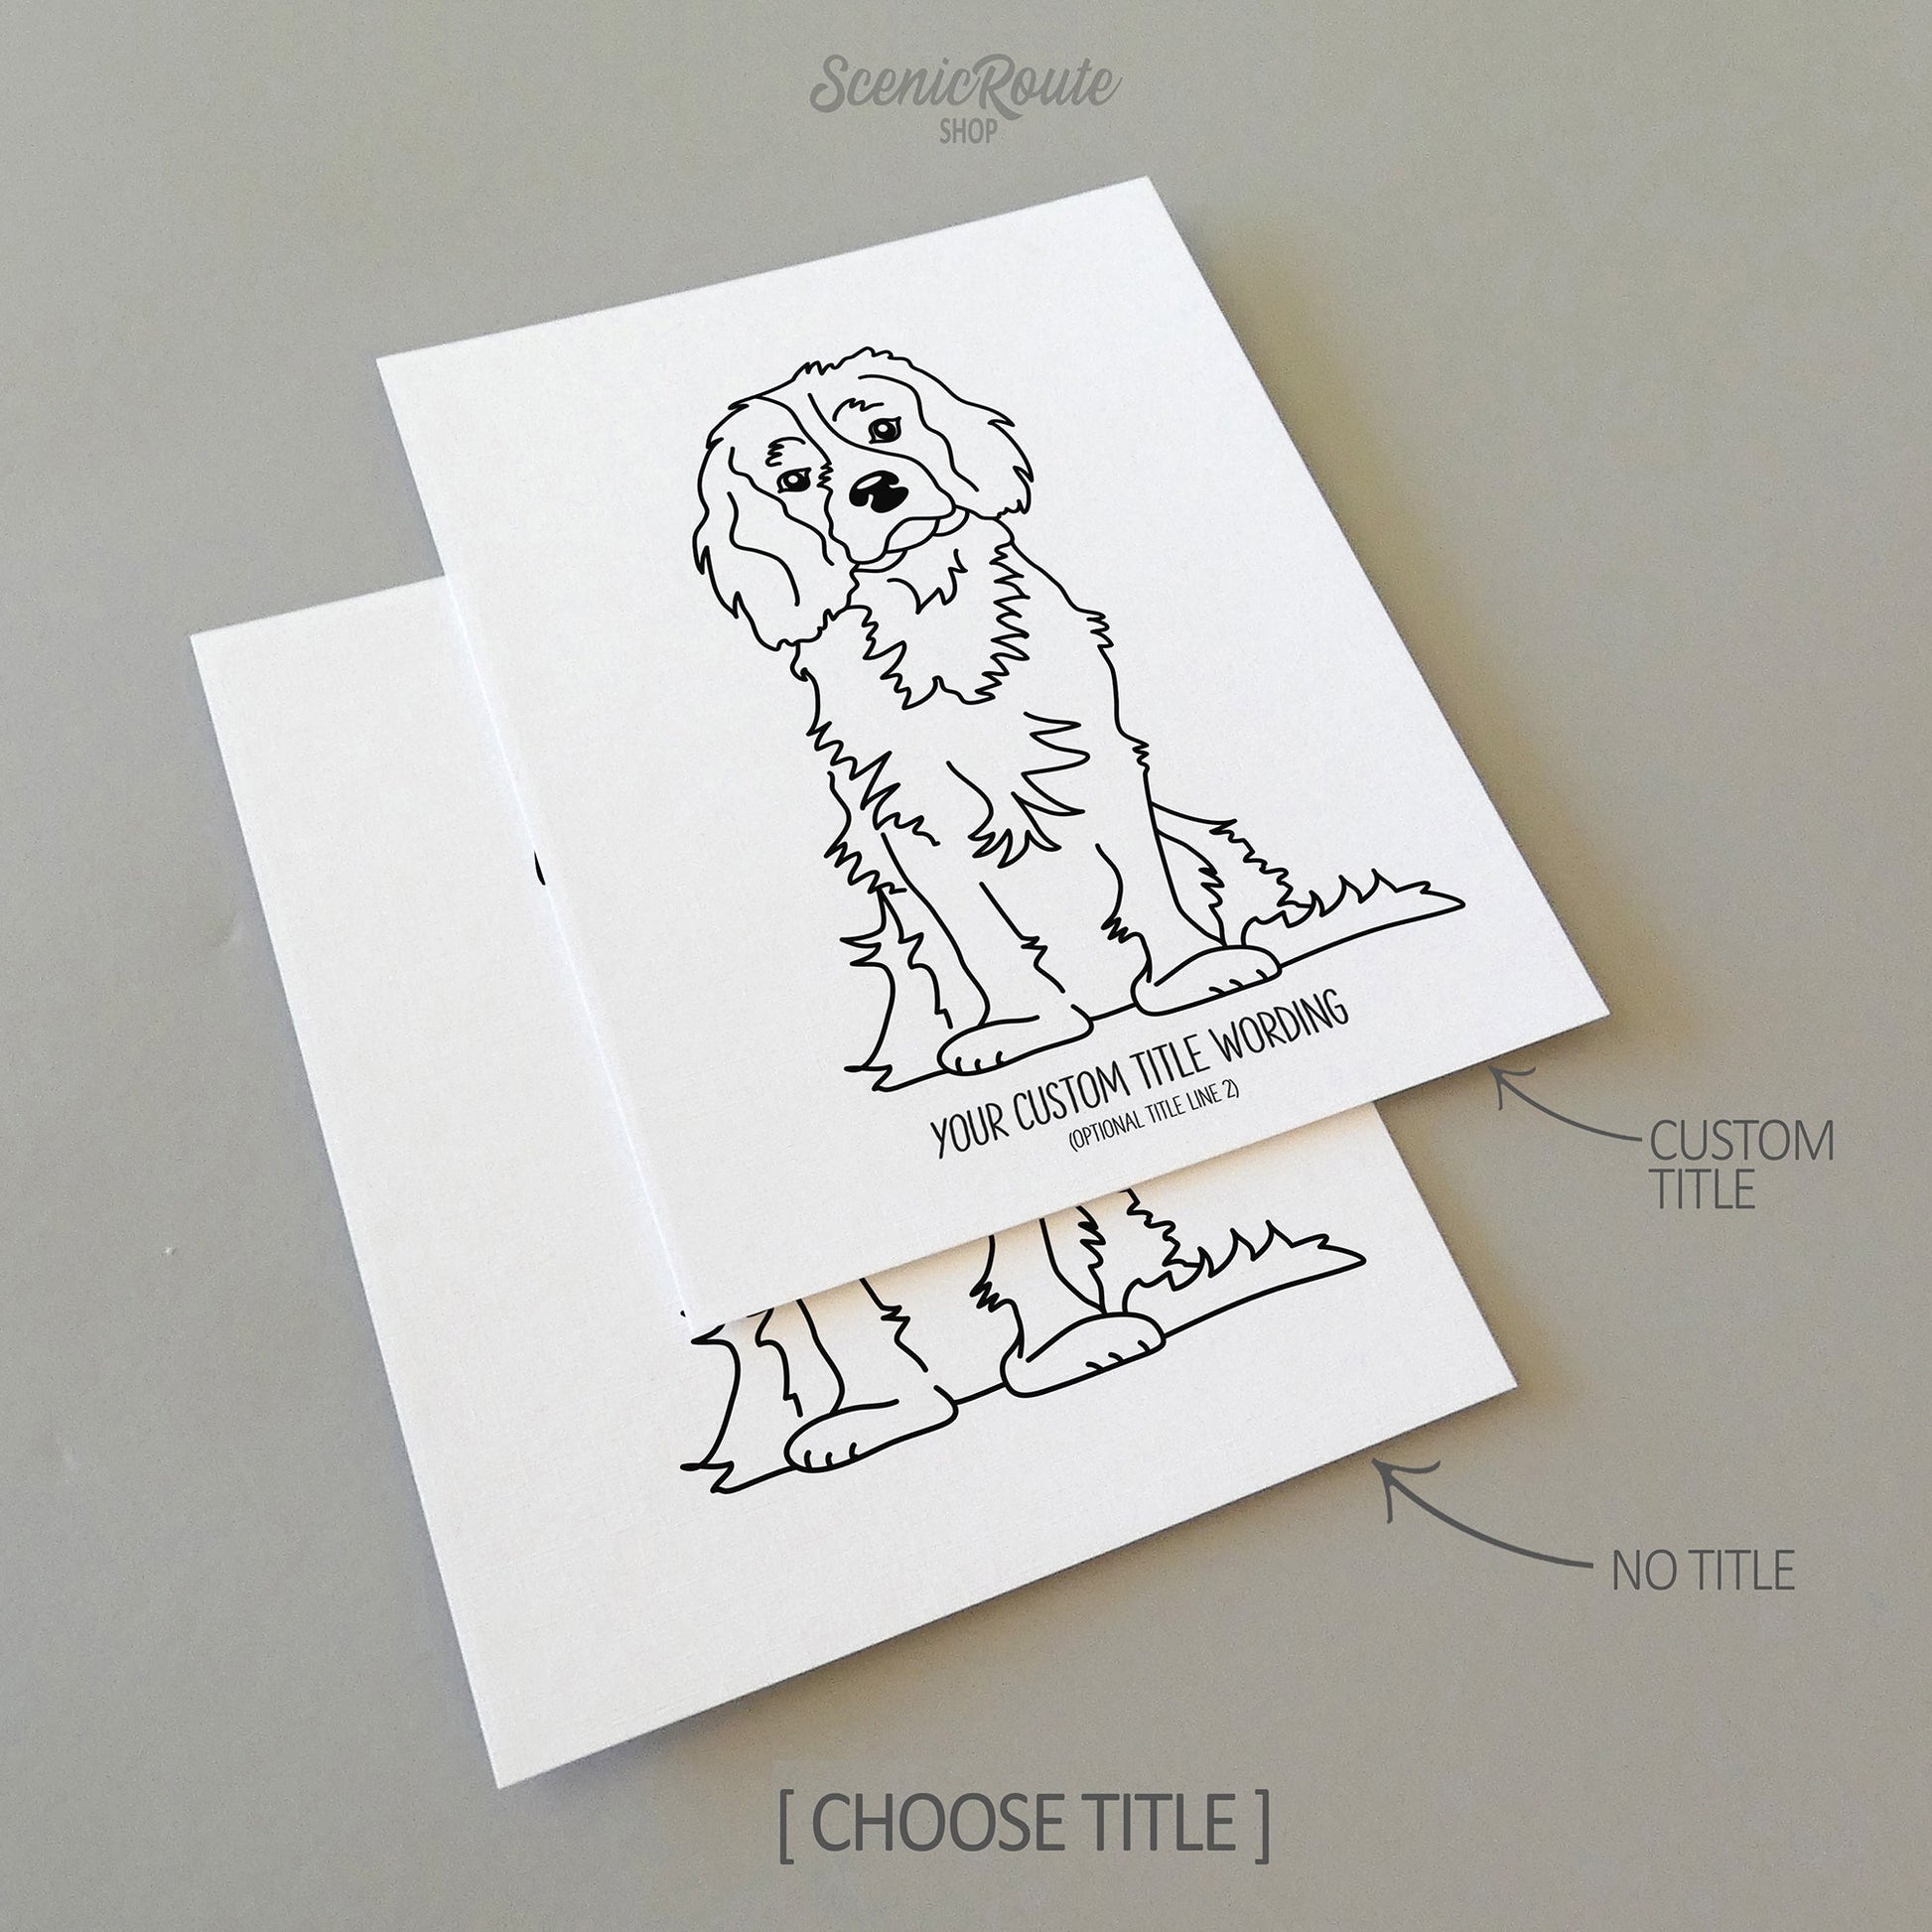 Two drawings of a Cavalier King Charles Spaniel dog on white linen paper with a gray background.  Pieces are shown with “No Title” and “Custom Title” options to illustrate the available art print options.